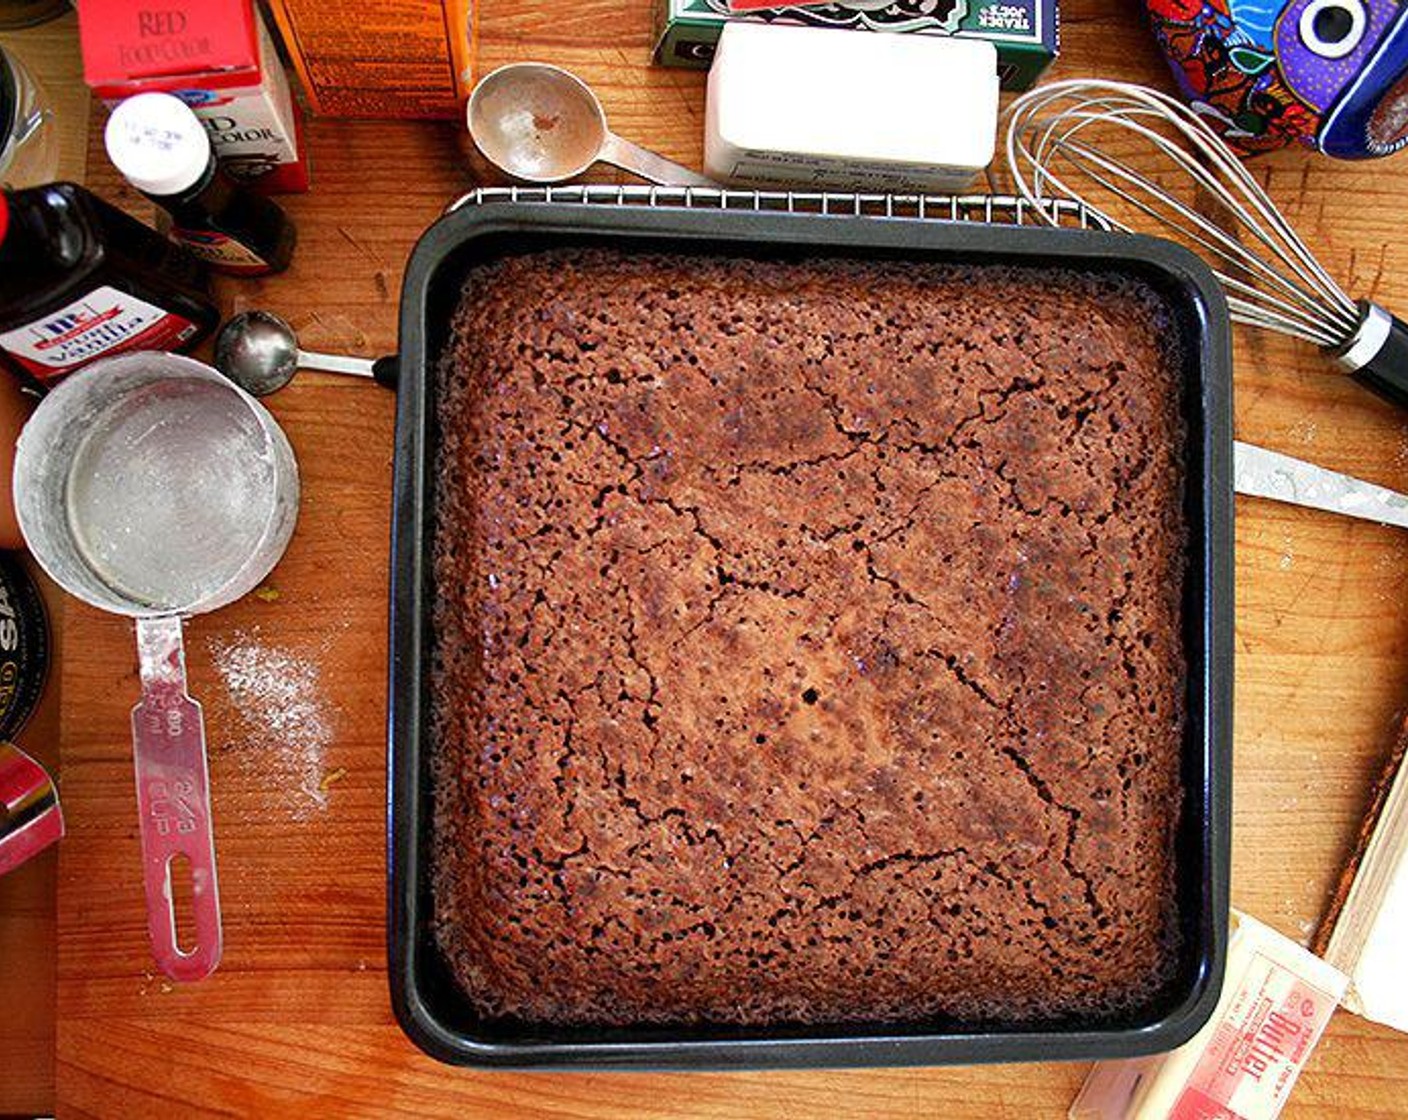 step 4 Spread into prepared pan and bake for approximately 37-40 minutes. Insert a pairing knife or steak knife straight into center. If it comes out clean or with just a few moist crumbs, the brownies are done.